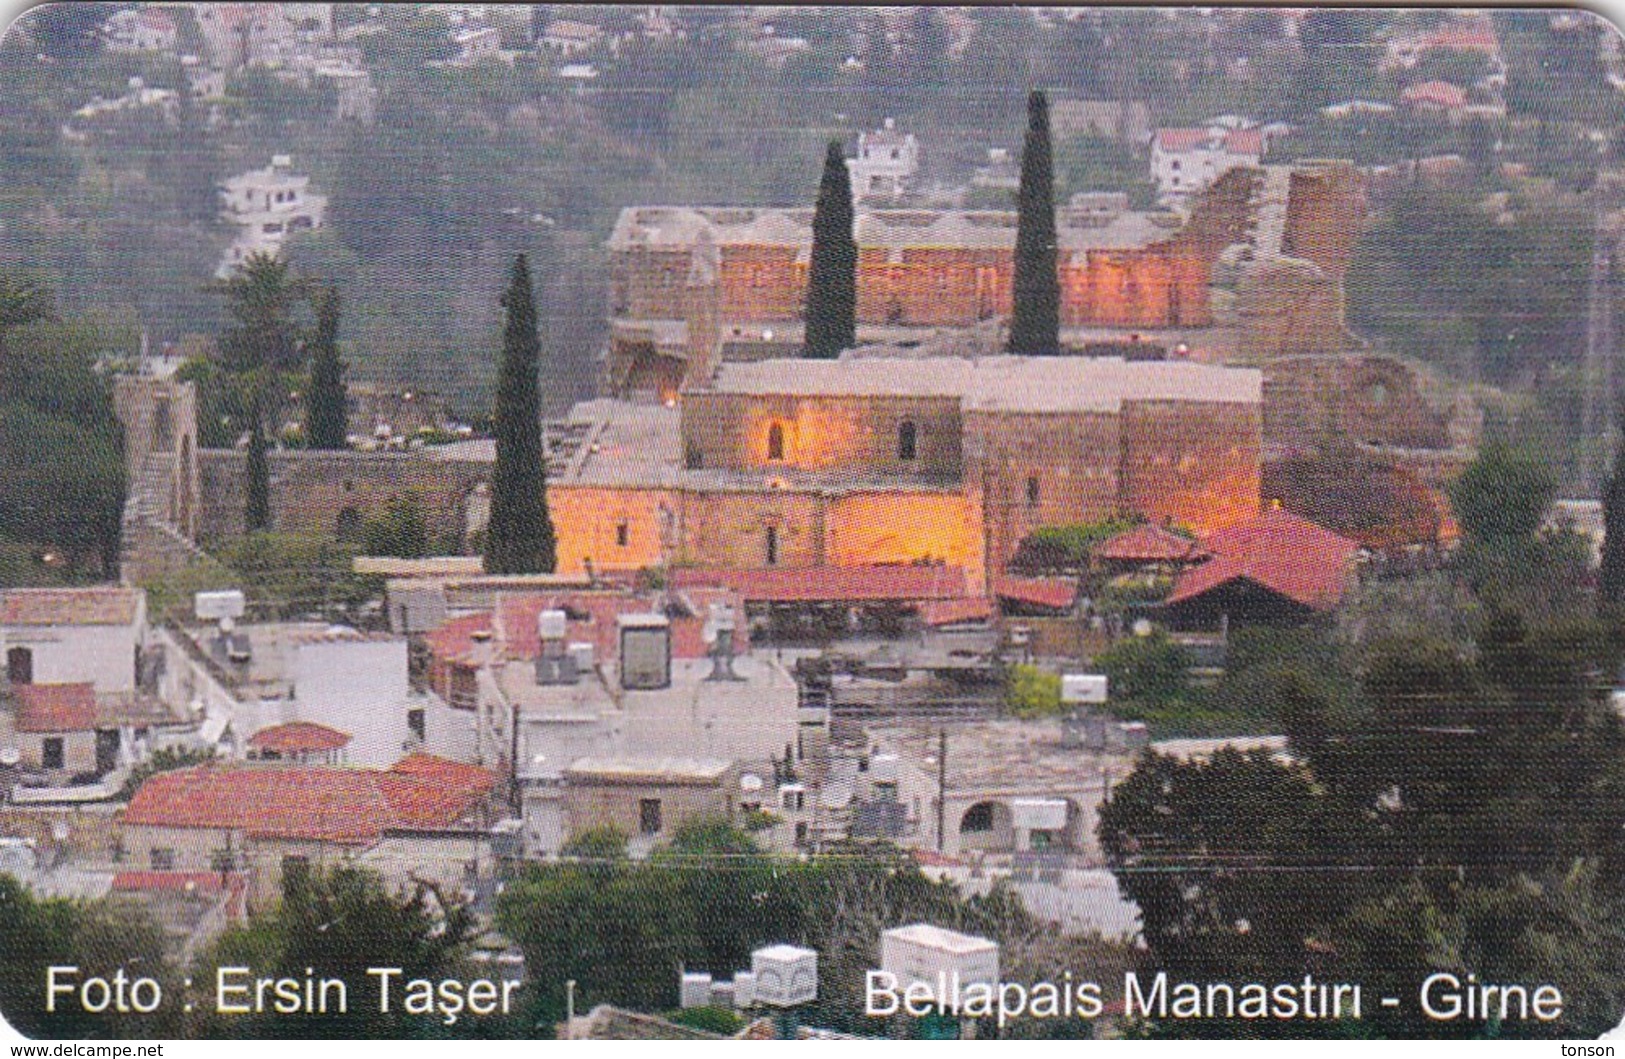 North Cyprus, NCY-KKT-C018, Bellapais Manastiri (Bellapais Abbey), 2 Scans      Without Issue Date. - Chypre